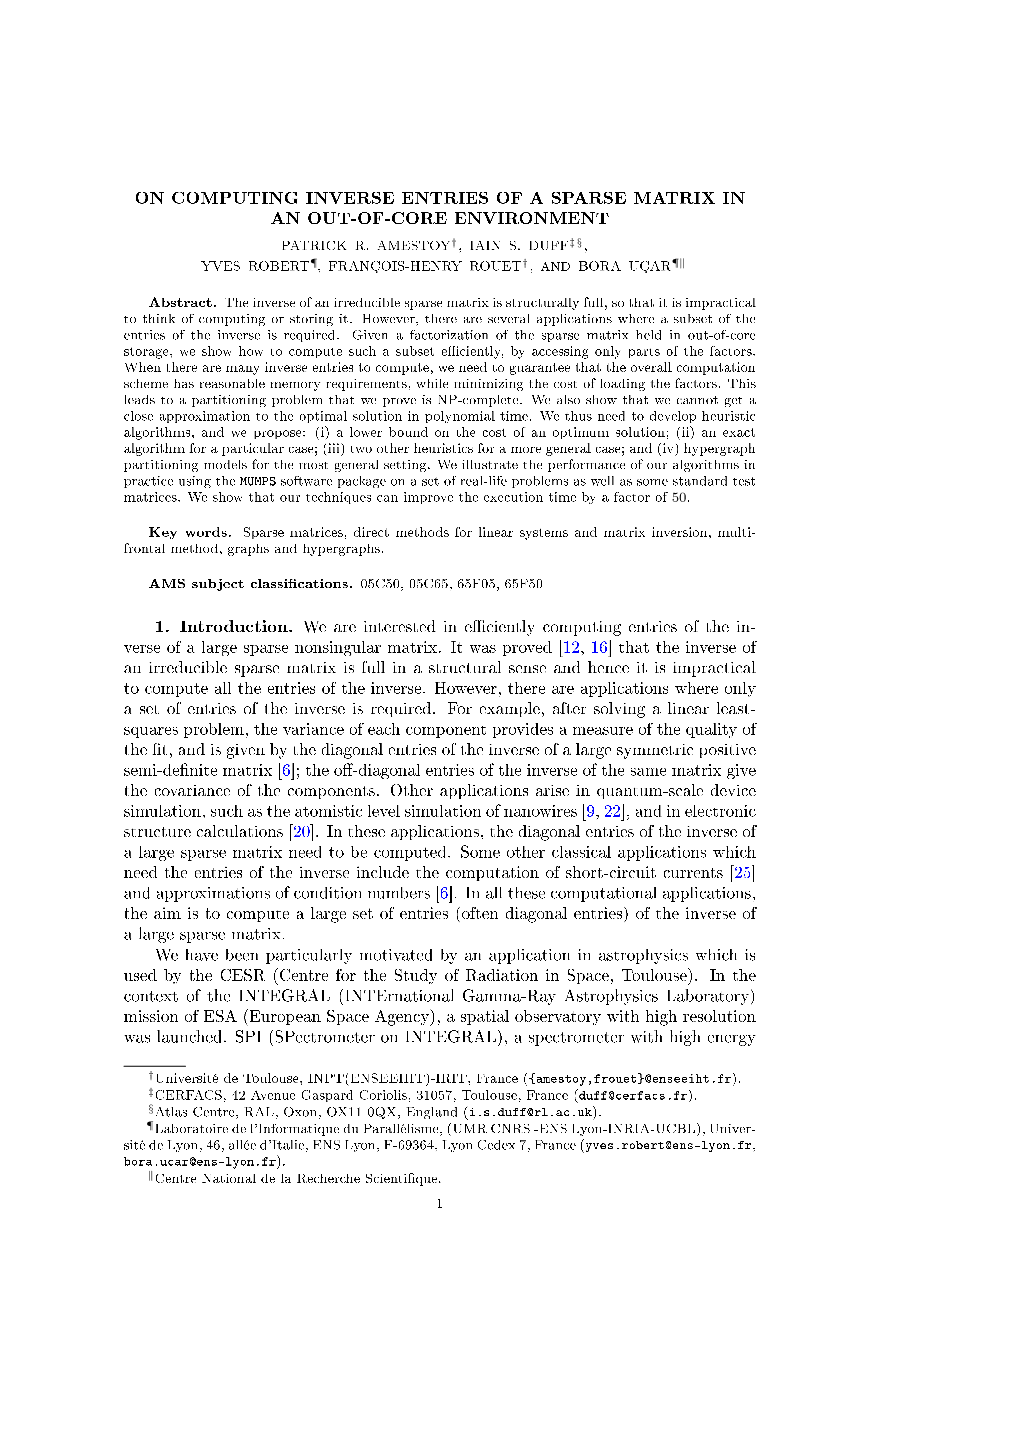 On Computing Inverse Entries of a Sparse Matrix in an Out-Of-Core Environment Patrick R